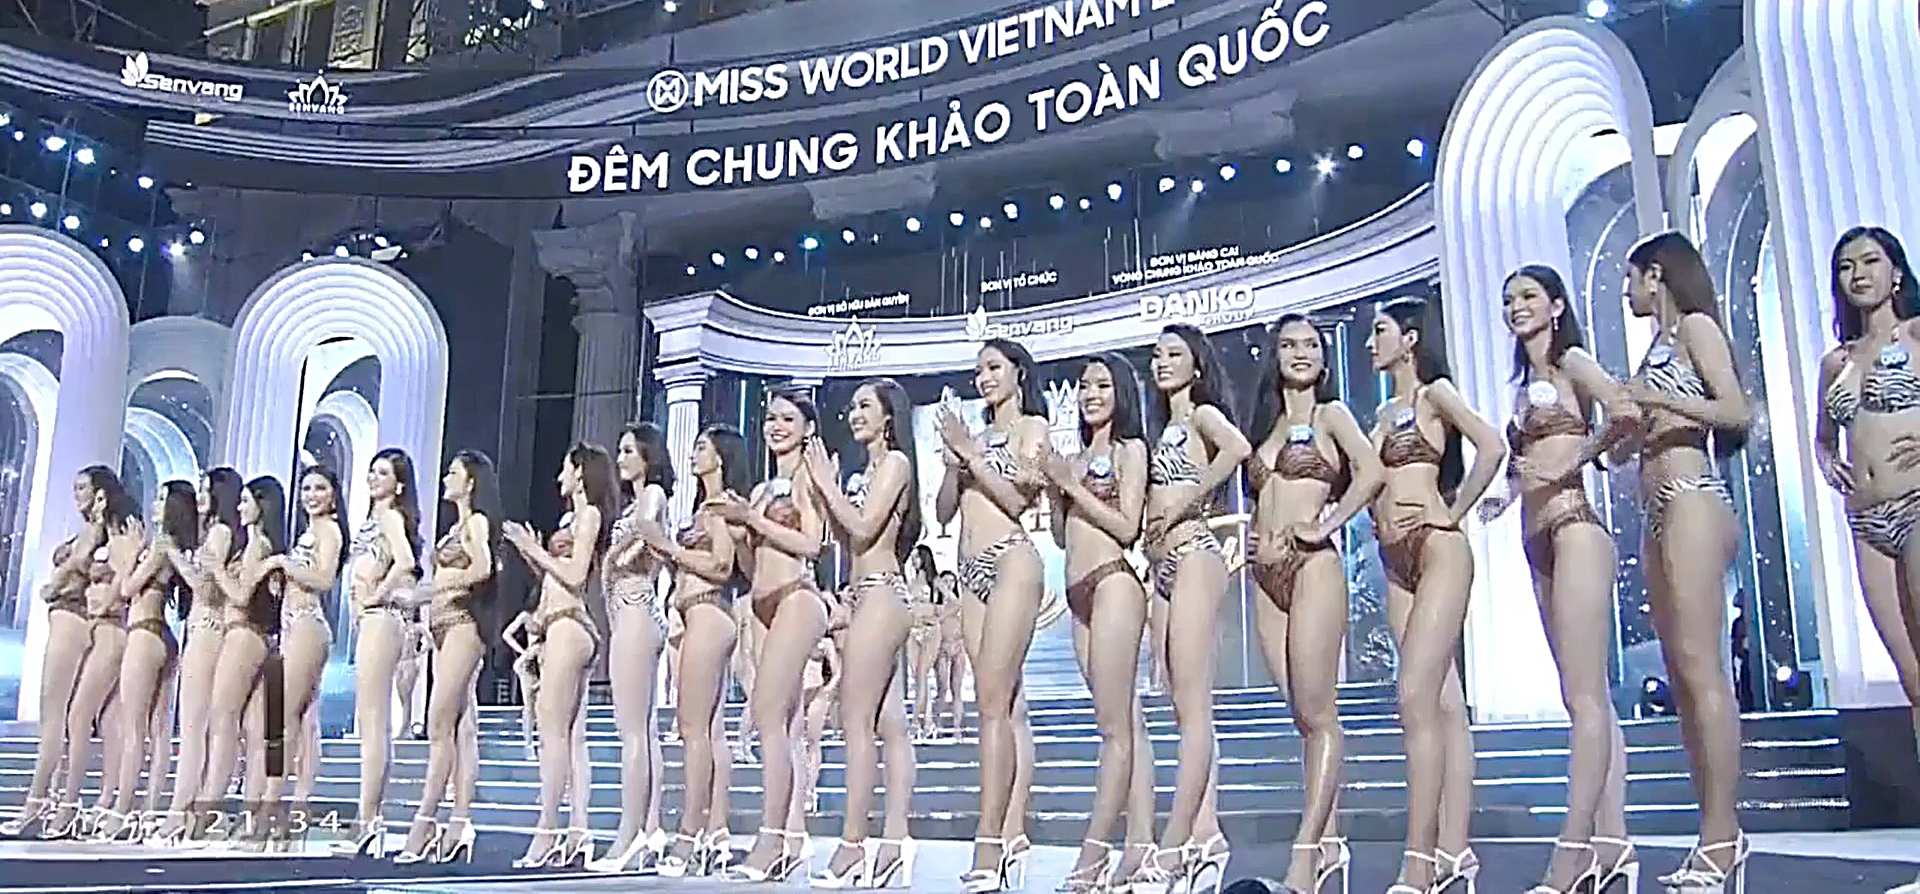 At Miss World VN contest, Nam Em was in the top 1 of the search for her body "fertile"  in bikini - 1